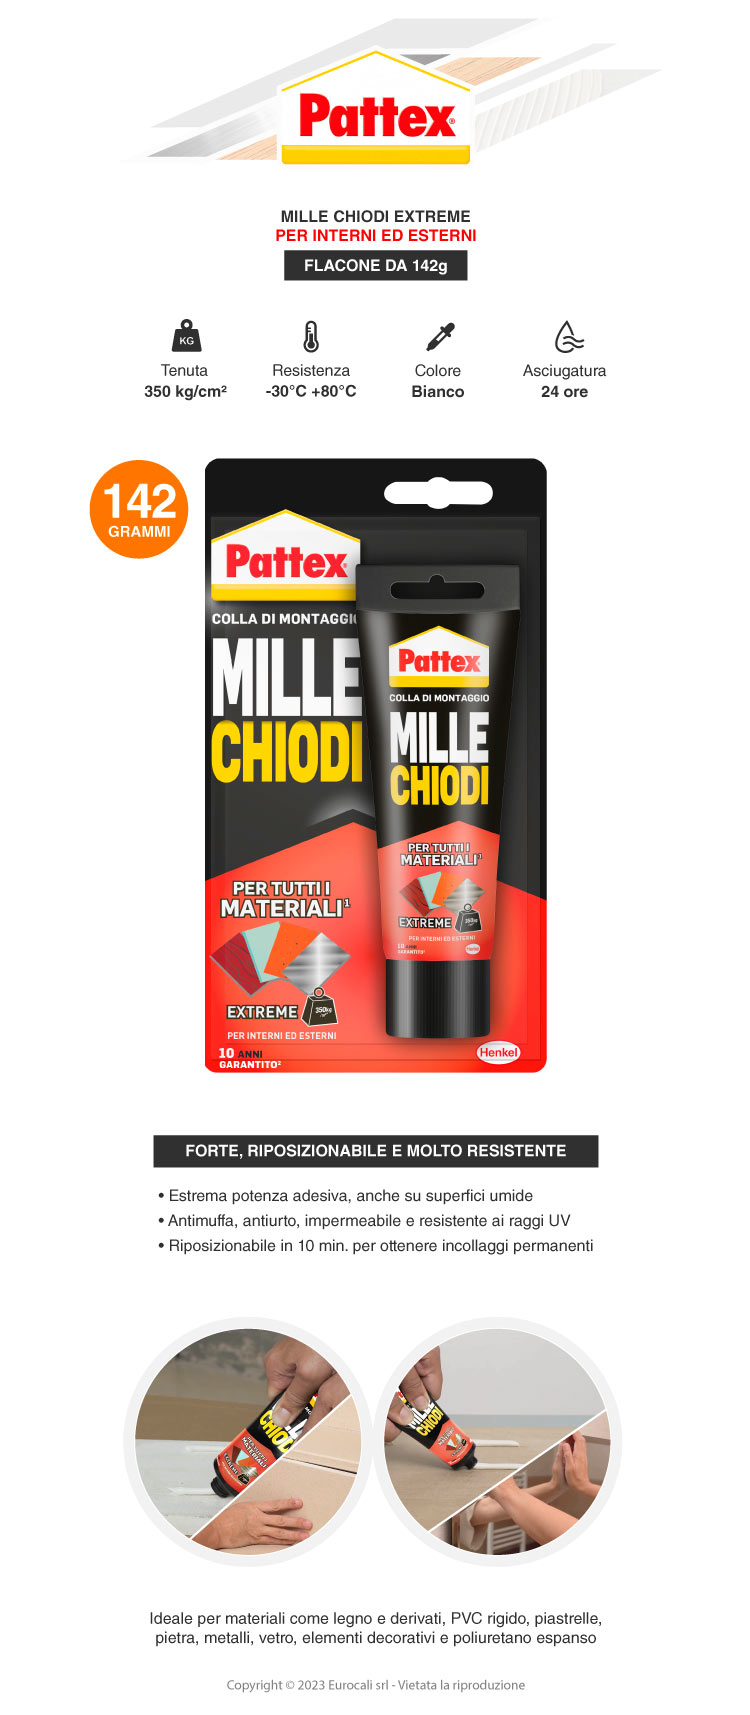 pattex mille chiodi extreme